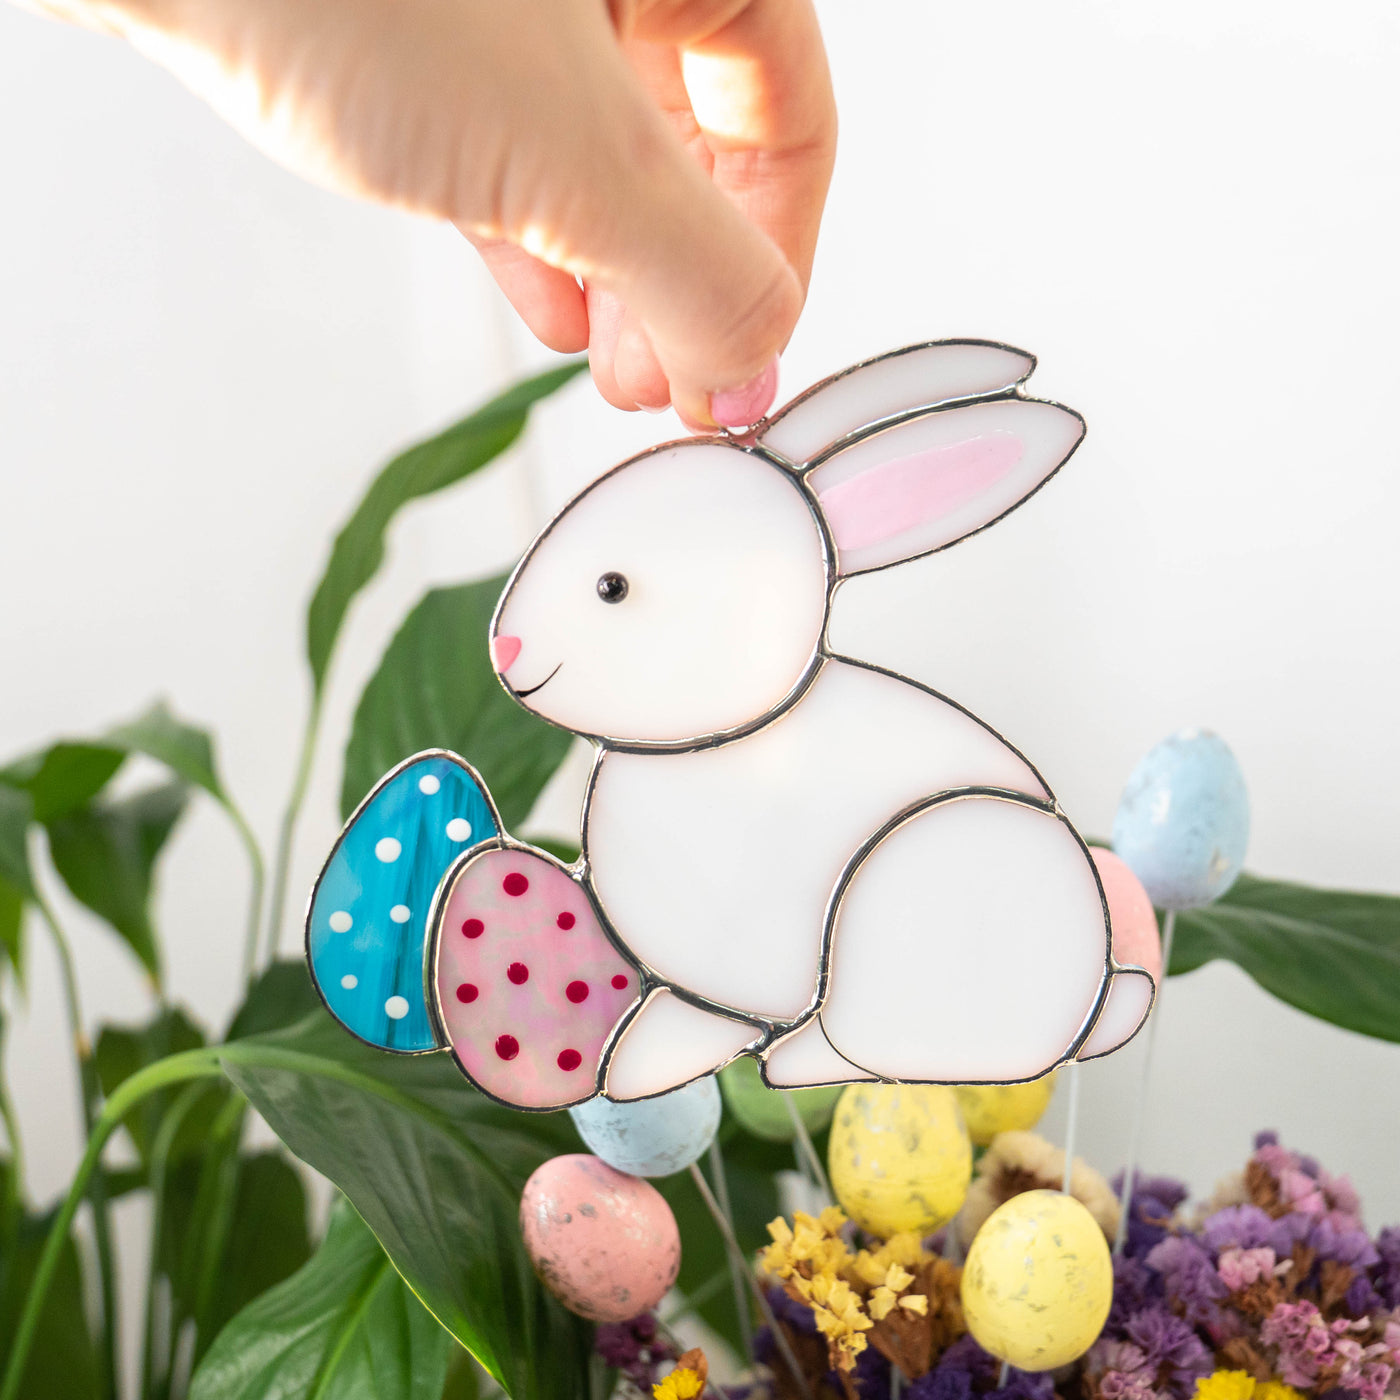 Stained glass bunny with pink and blue eggs suncatcher for Easter